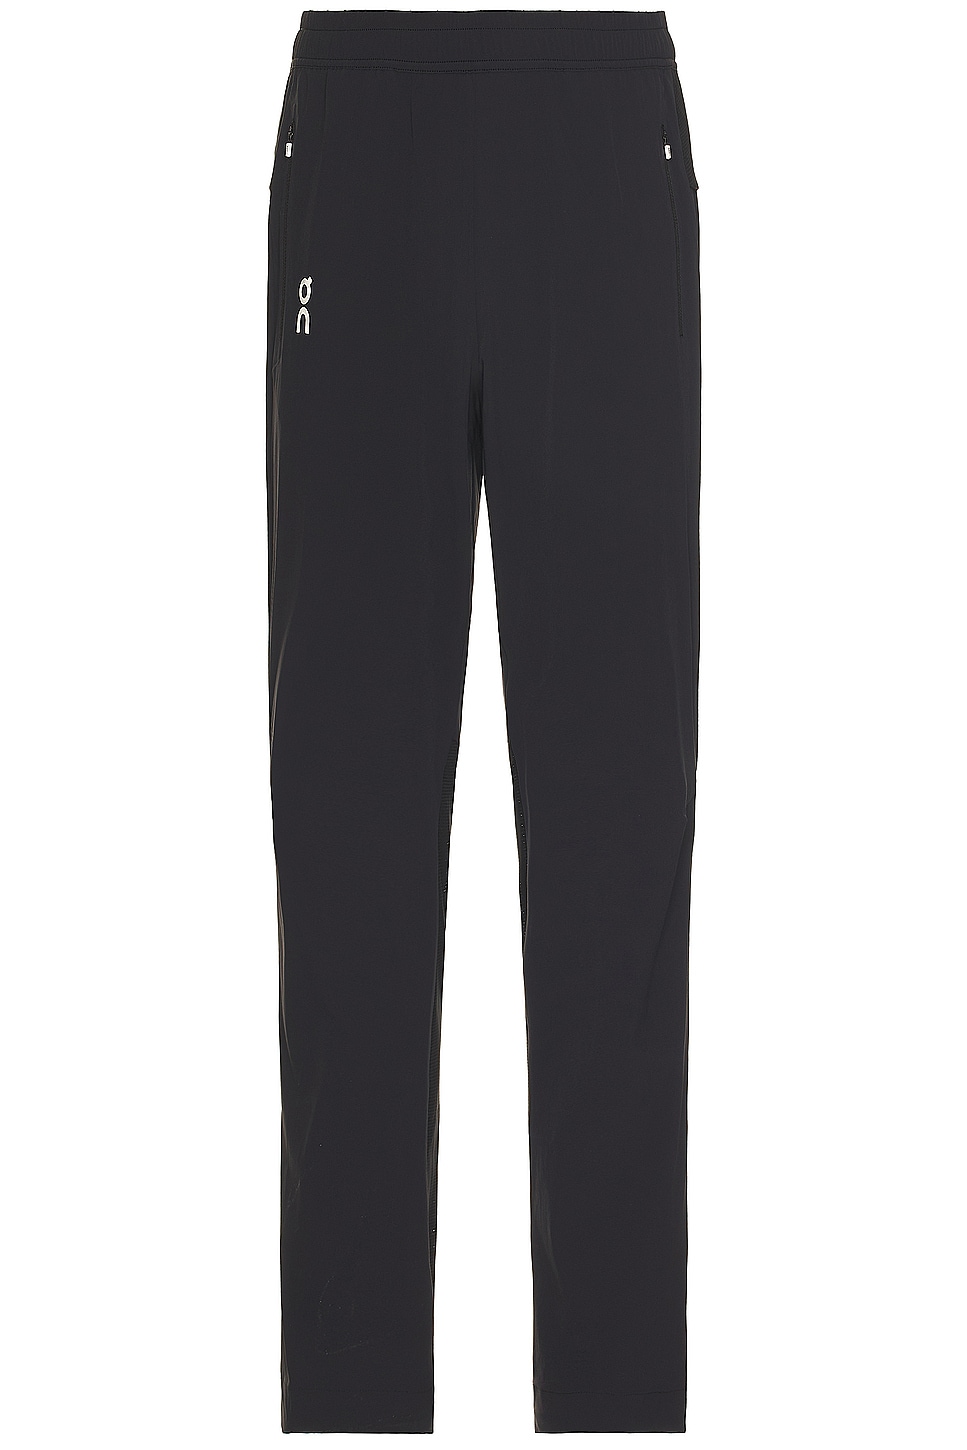 Image 1 of On Track Pants in Black